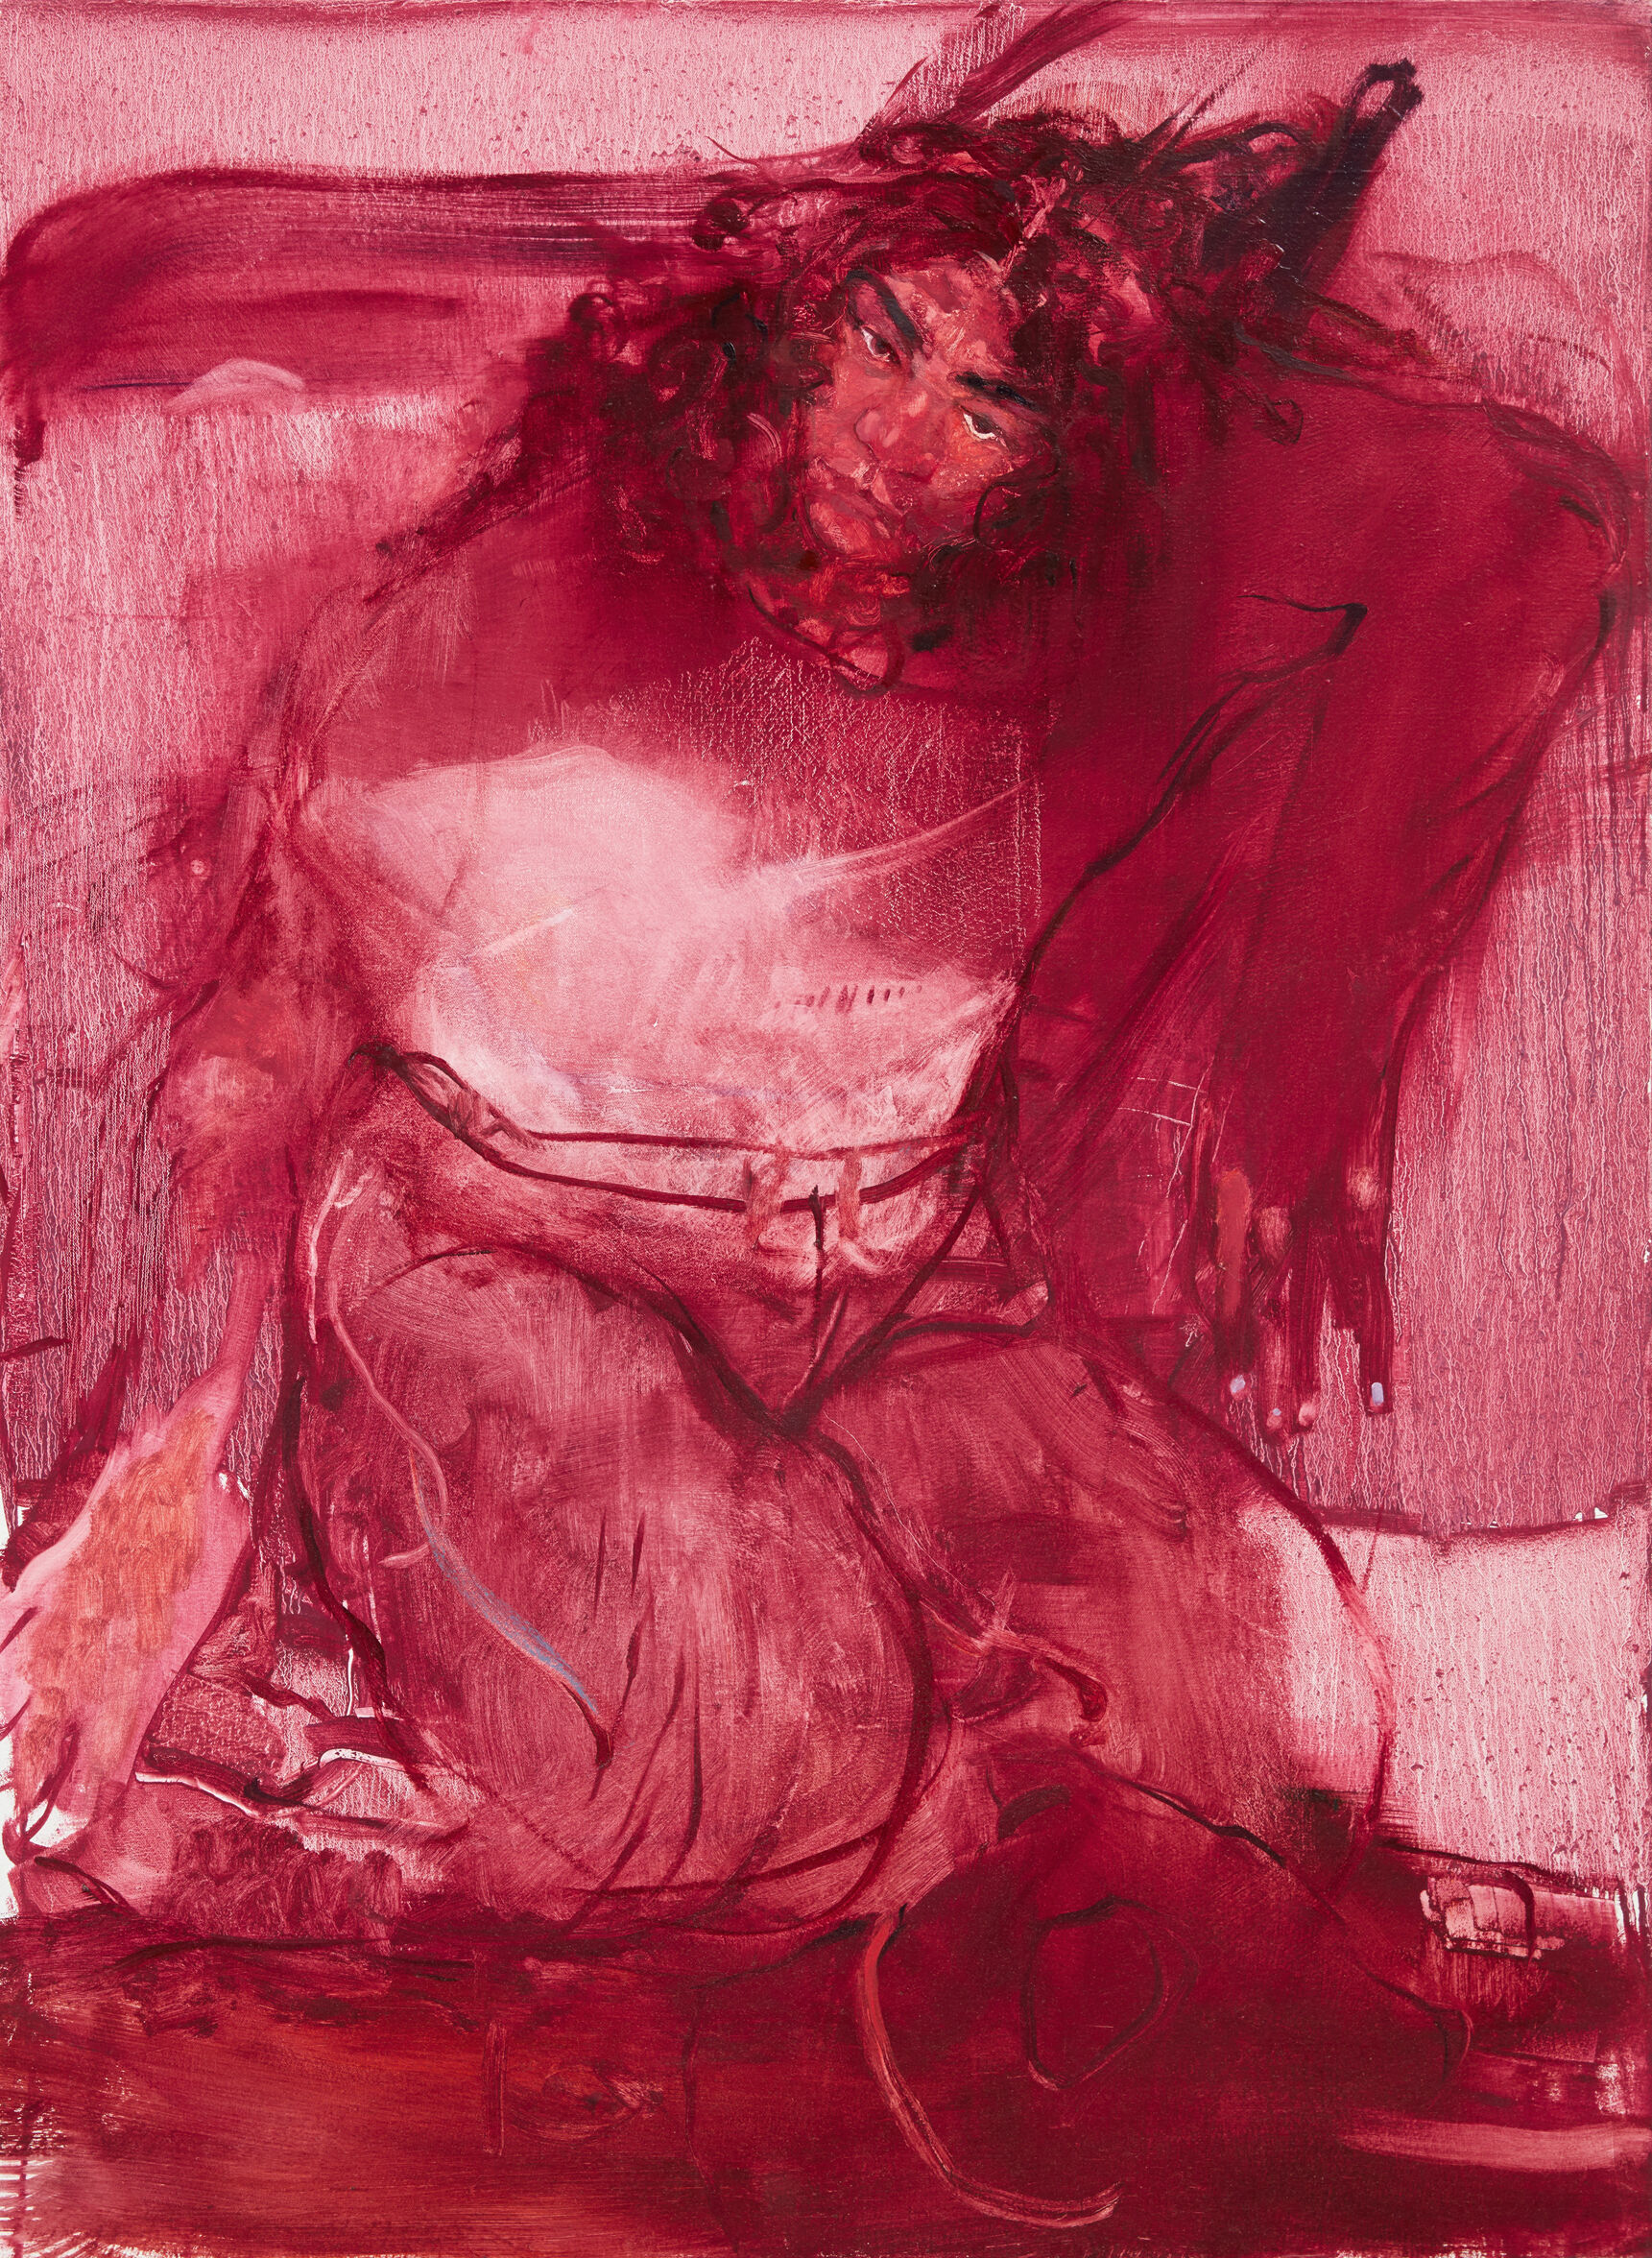 A kneeling female figure, leaning back nonchalantly and meeting the viewer's gaze, painted in various dark pink tones.